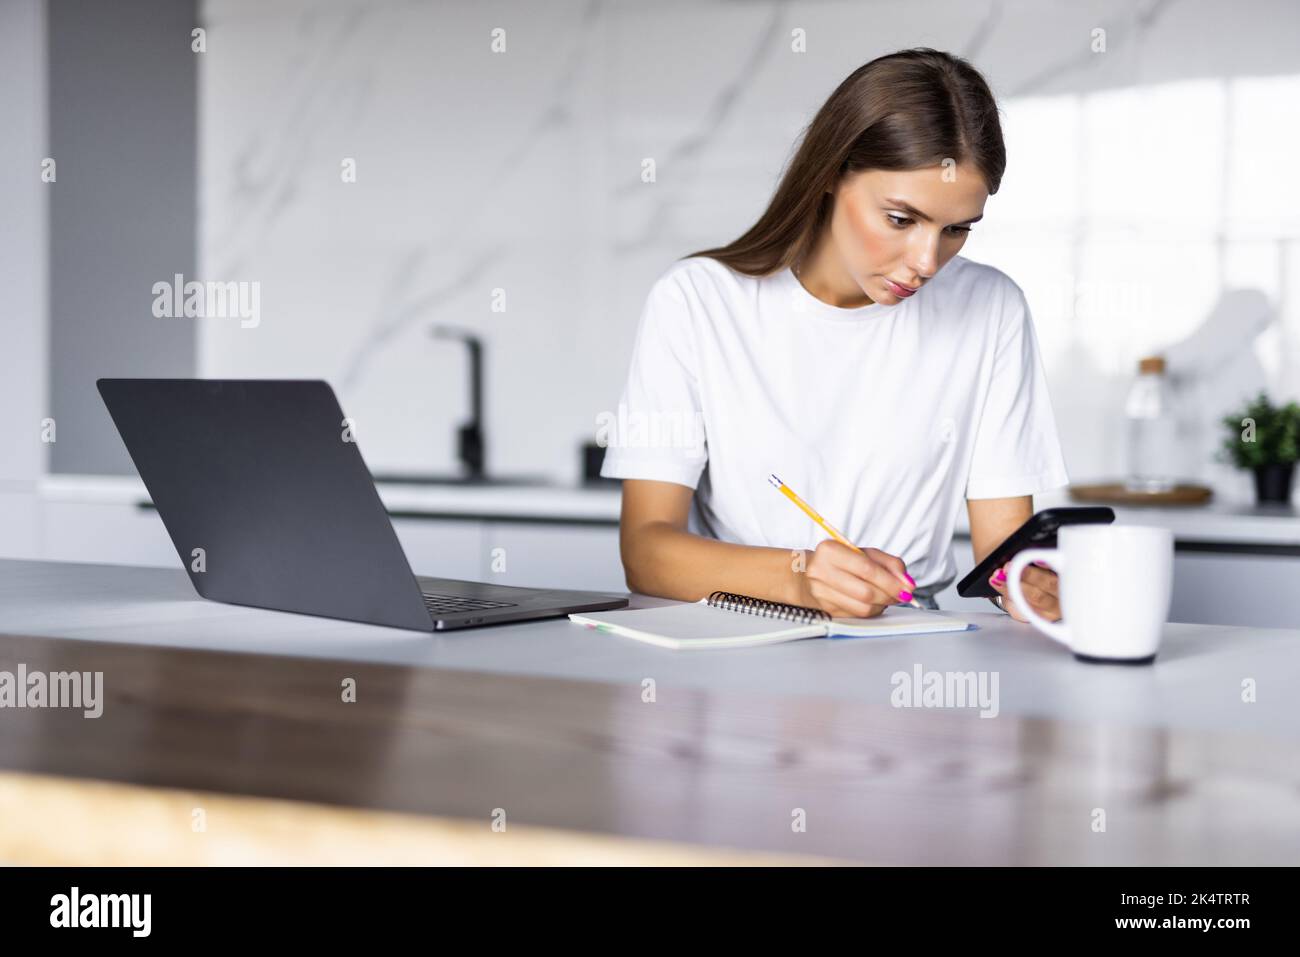 Work at home. Young woman use a laptop to work in the kitchen writes something in a notebook with a pen and speaks on the phone Stock Photo